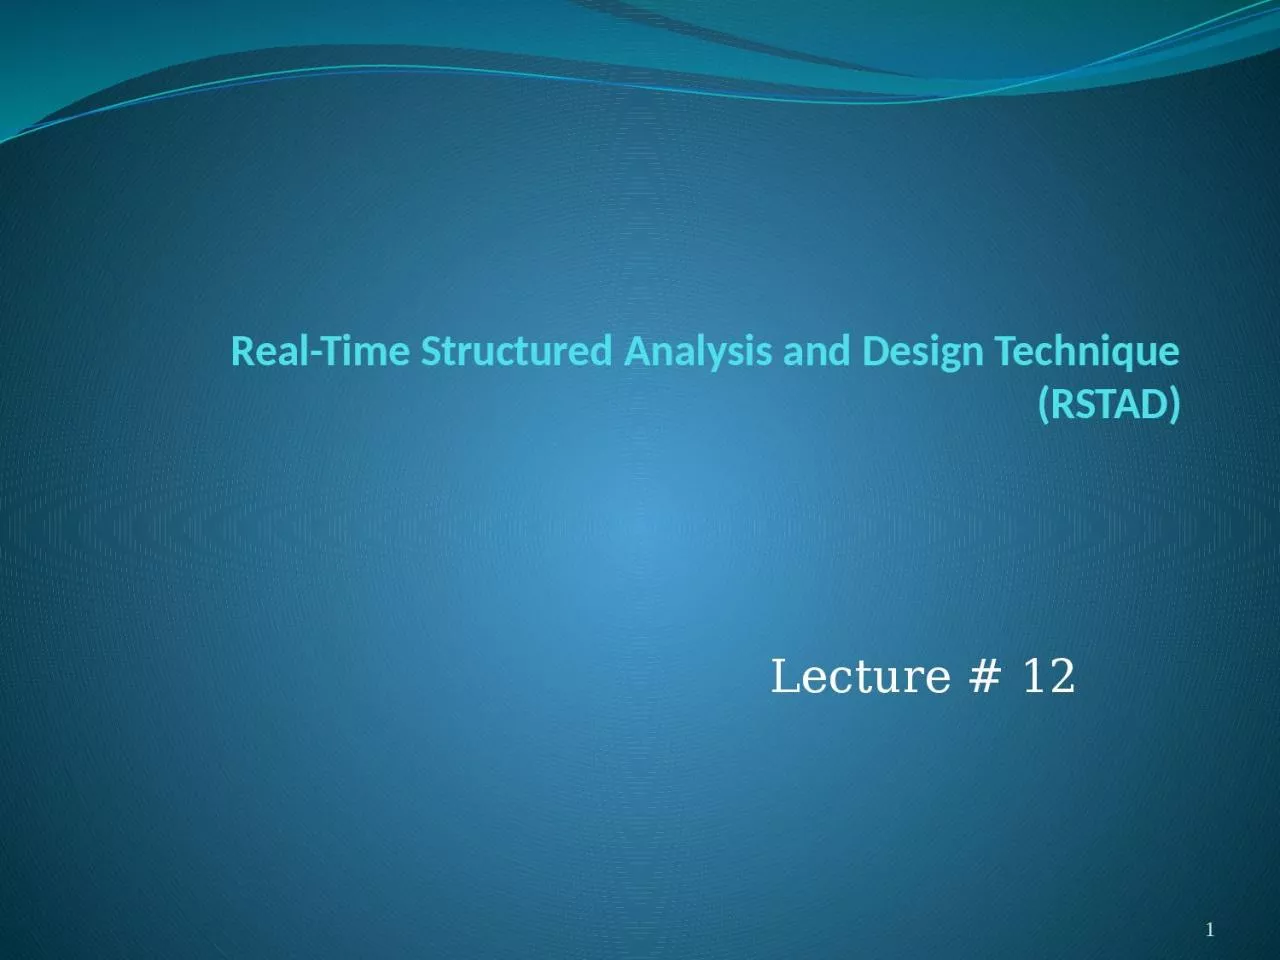 Real-Time Structured Analysis and Design Technique (RSTAD)